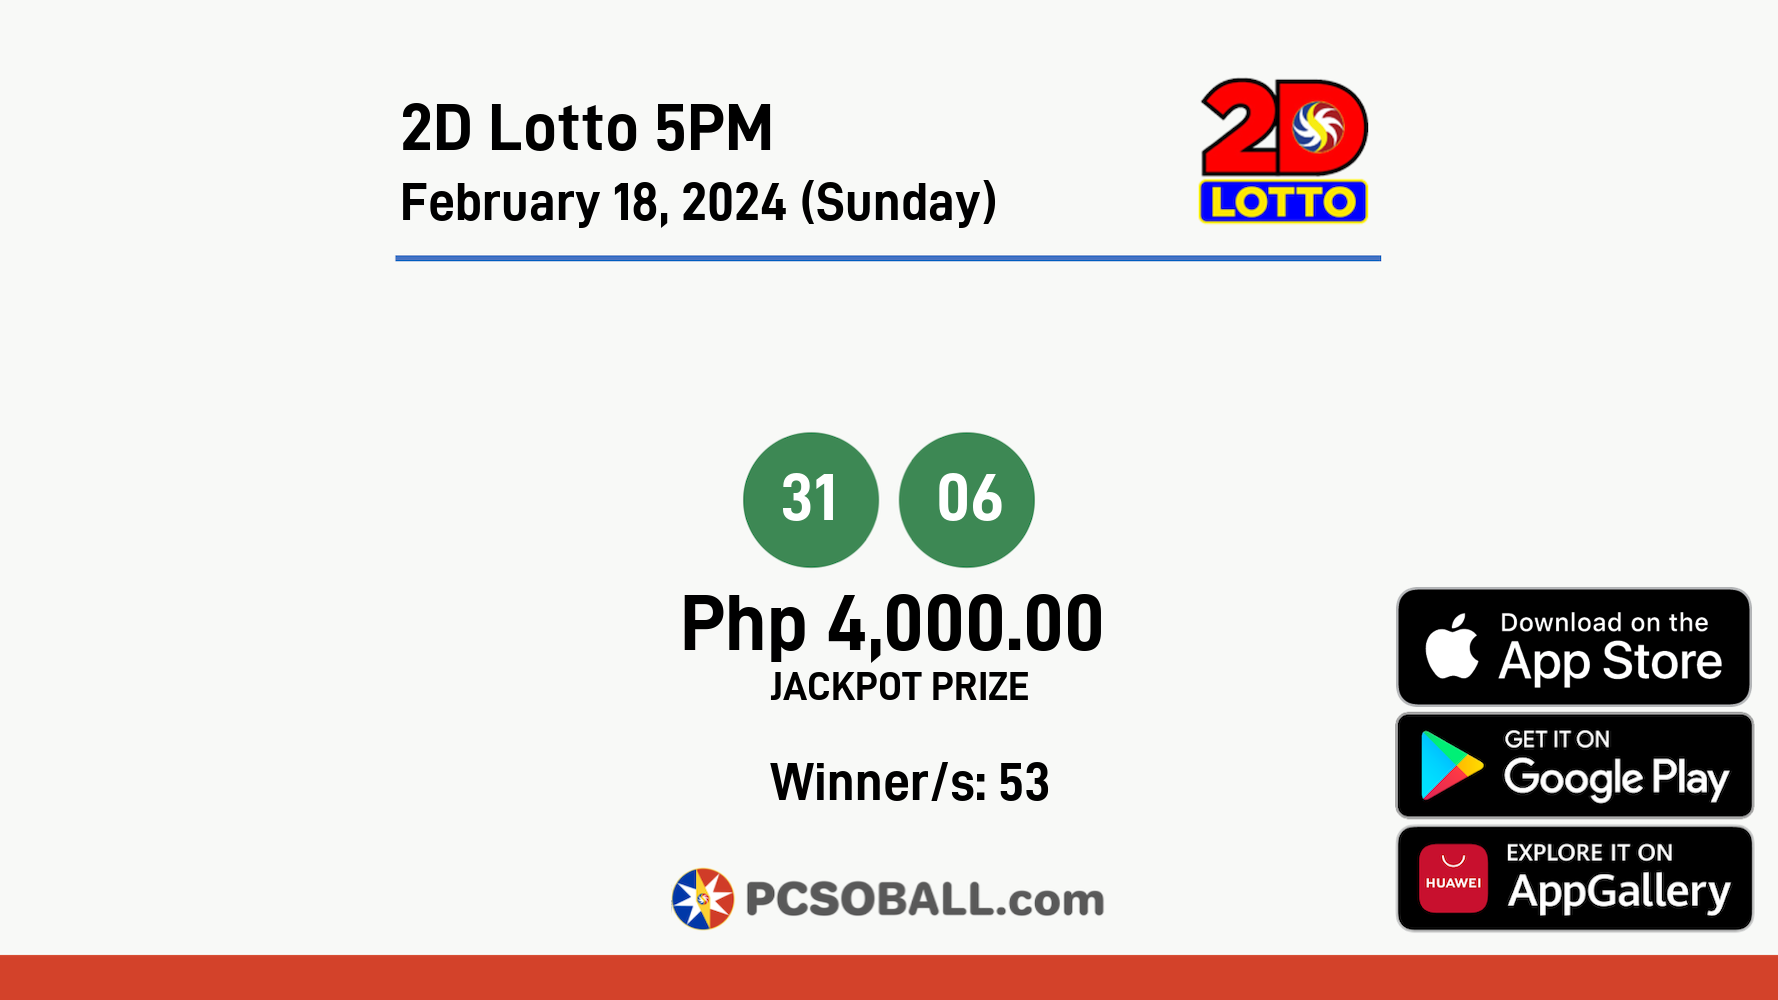 2D Lotto 5PM February 18, 2024 (Sunday) Result